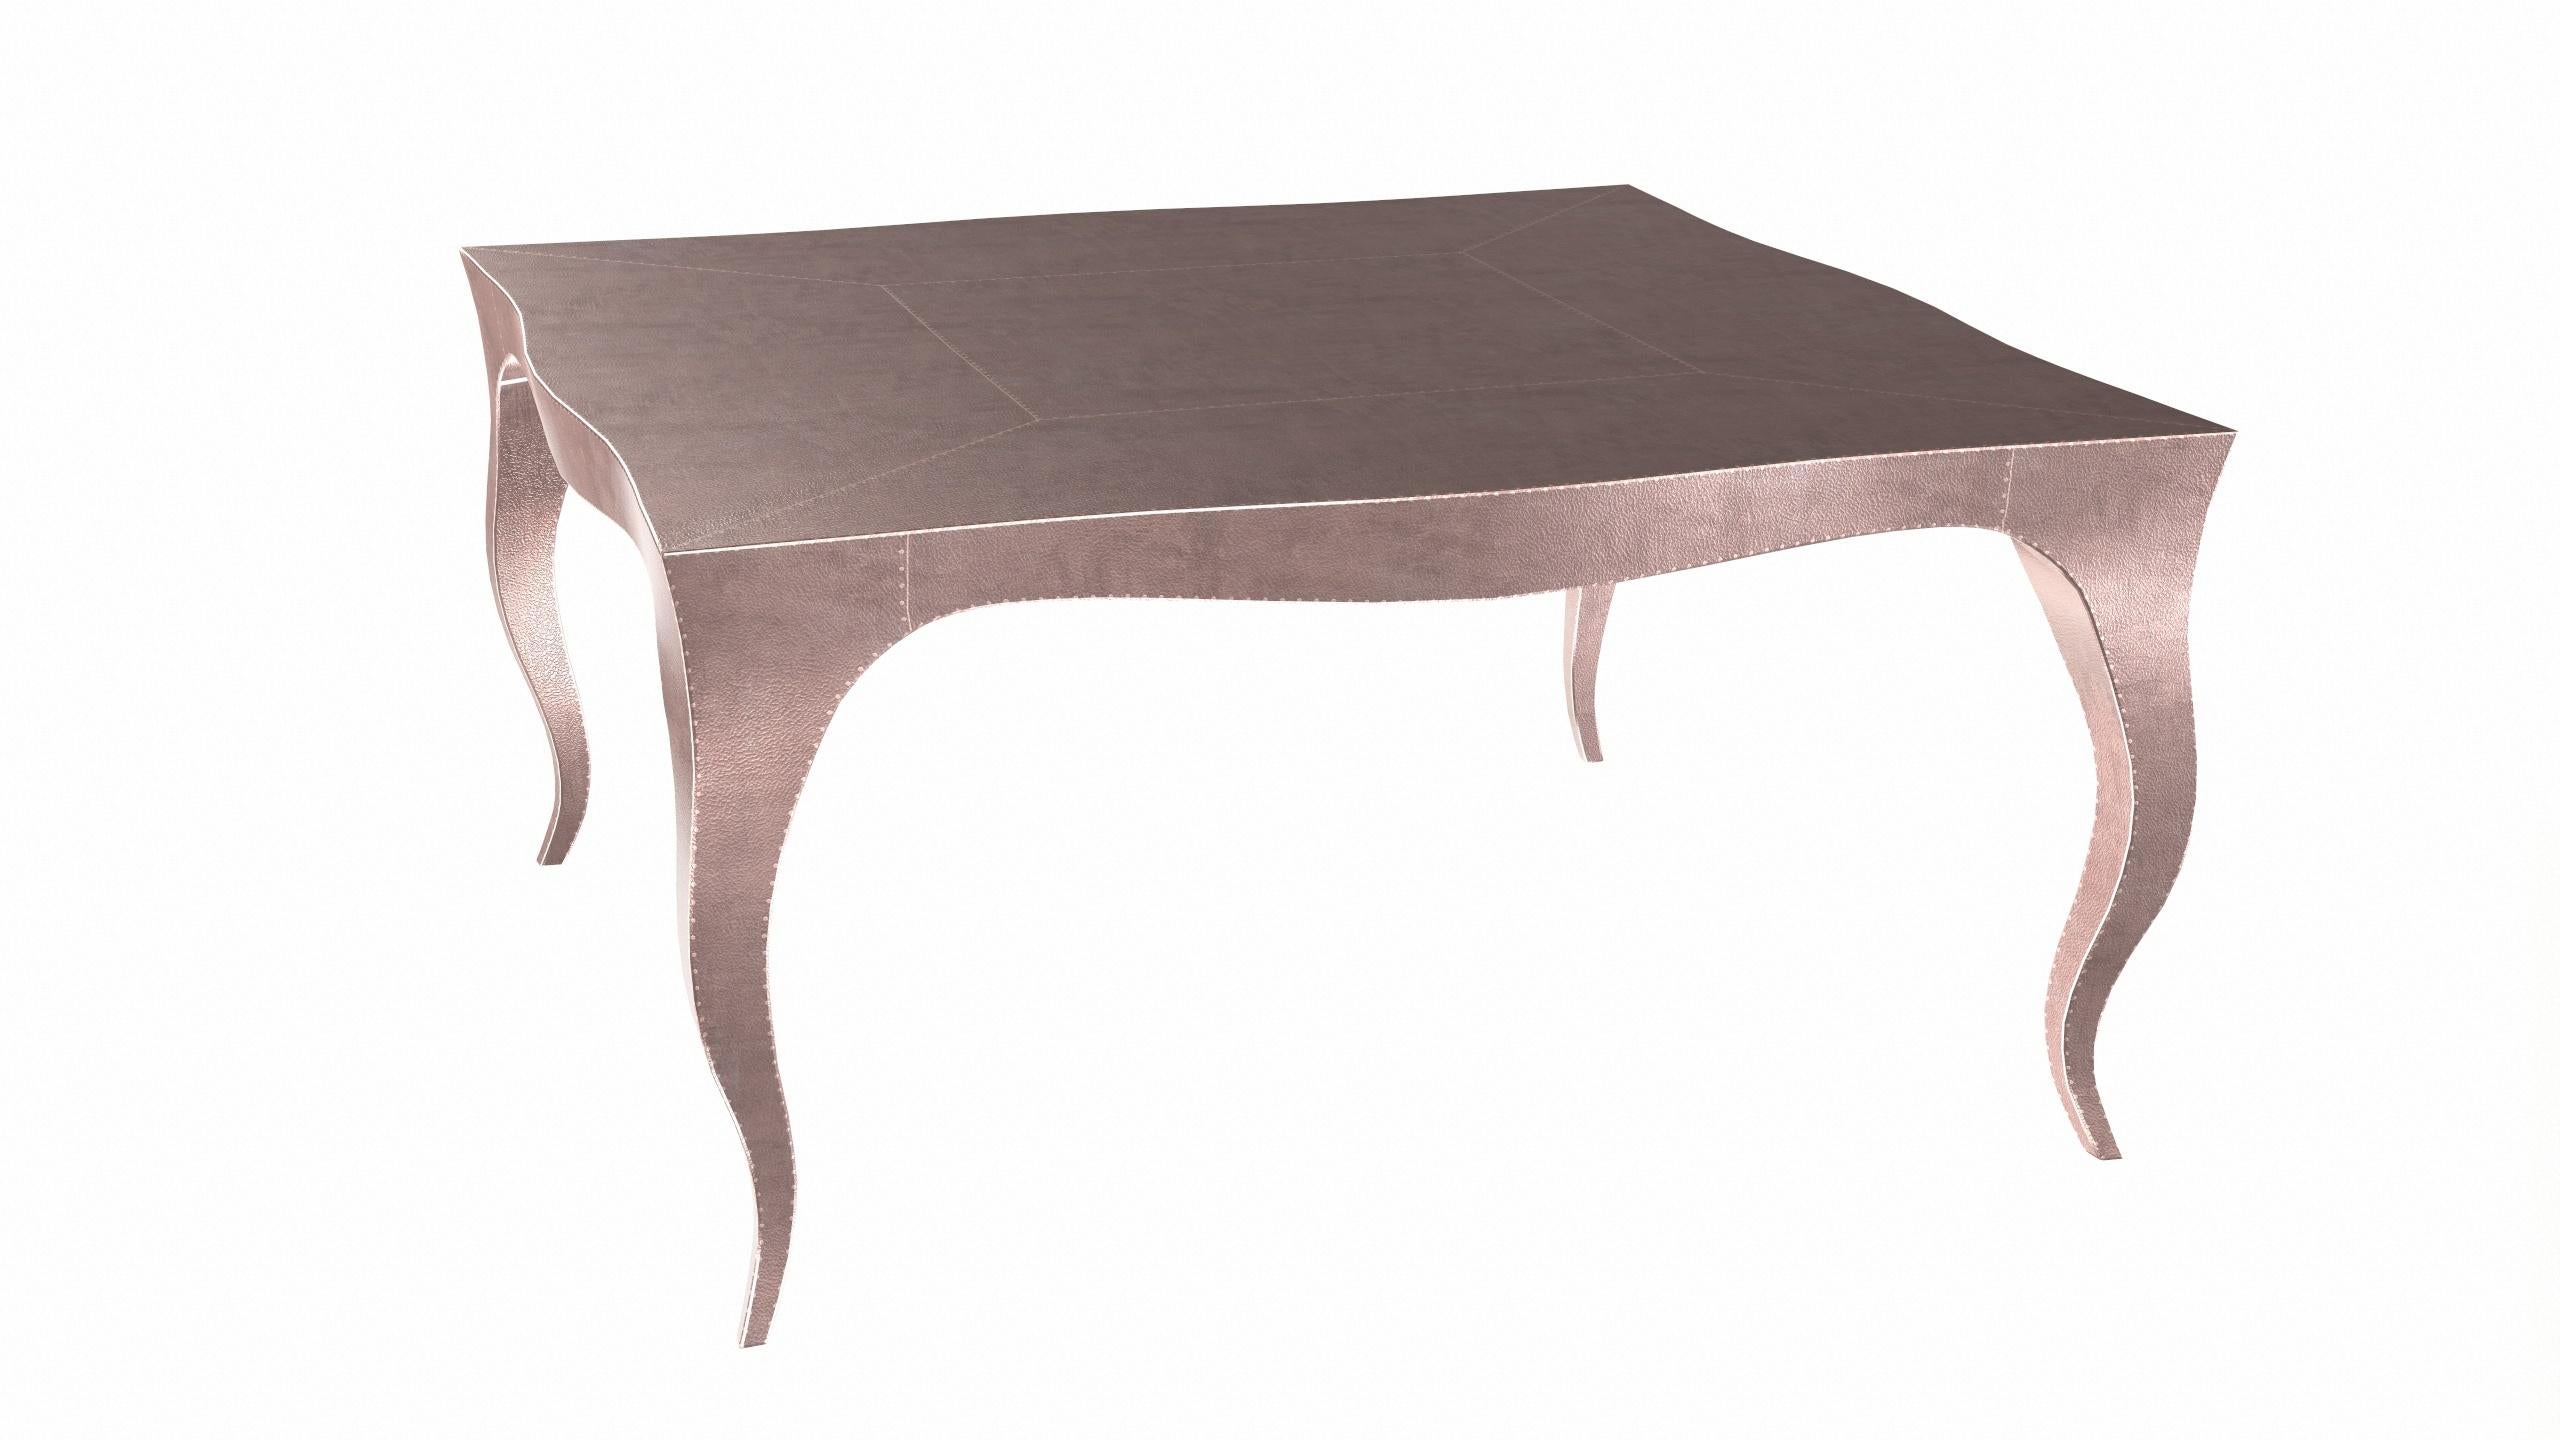 Metal Louise Art Deco Game Tables Fine Hammered Copper by Paul Mathieu for S. Odegard For Sale